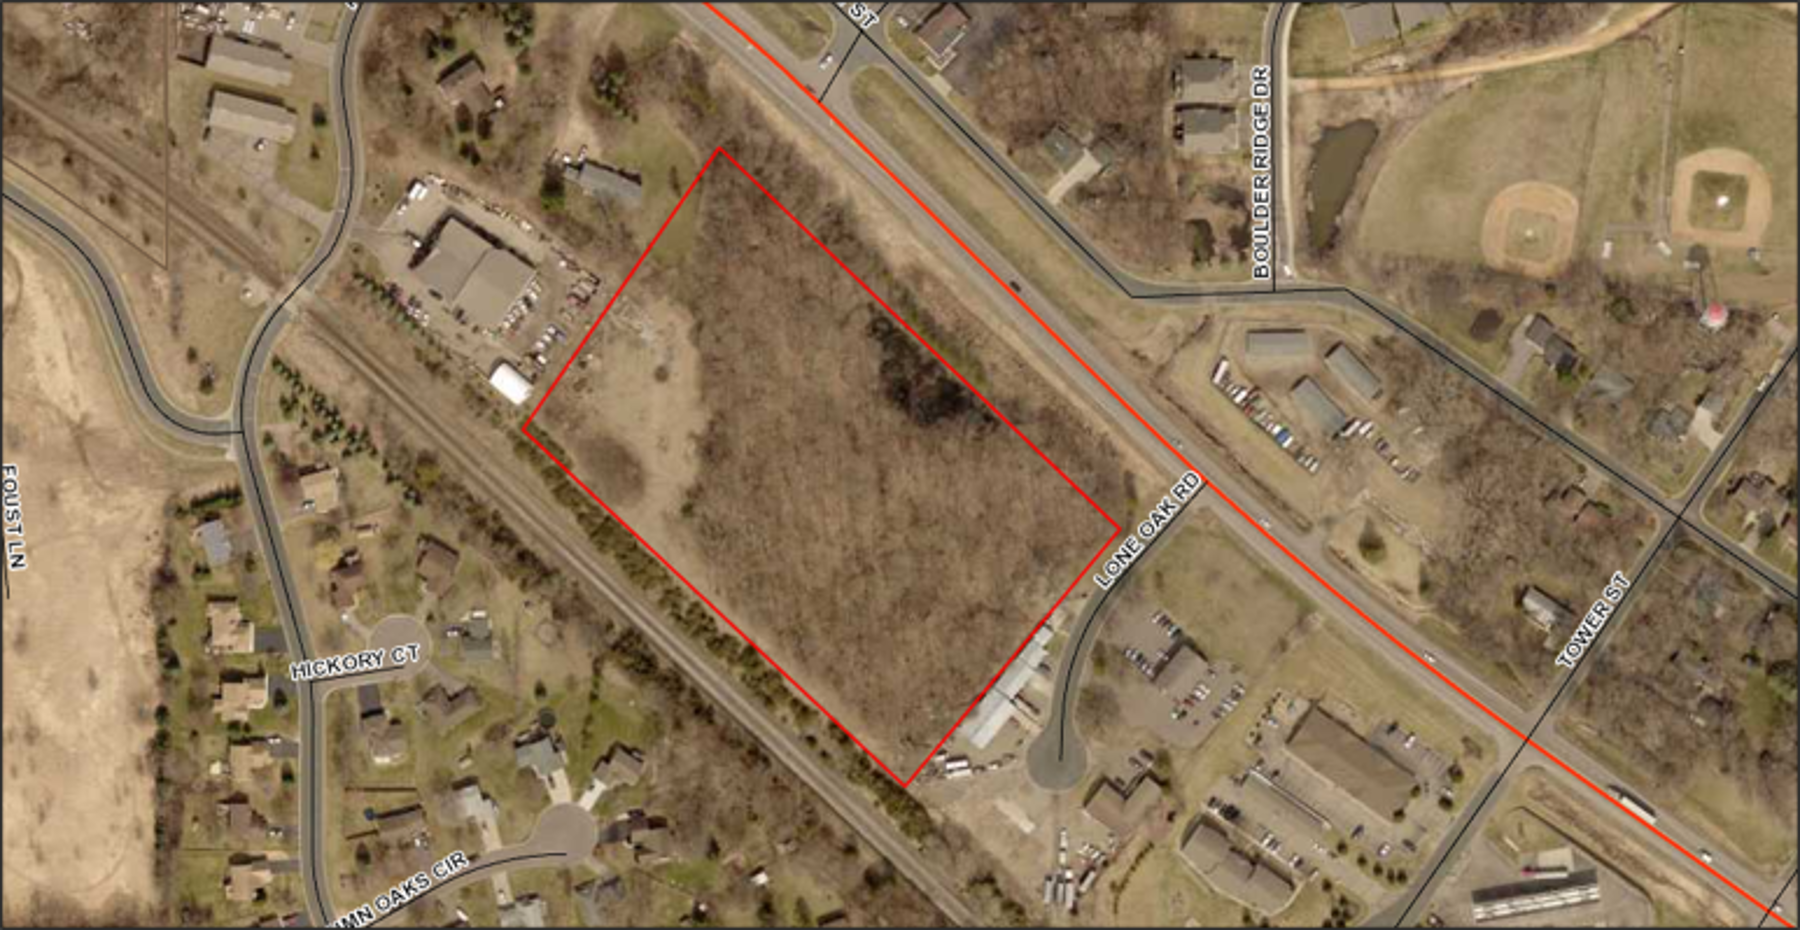 City of Rockford Hwy 55 Land Auction - 7.24 Acres